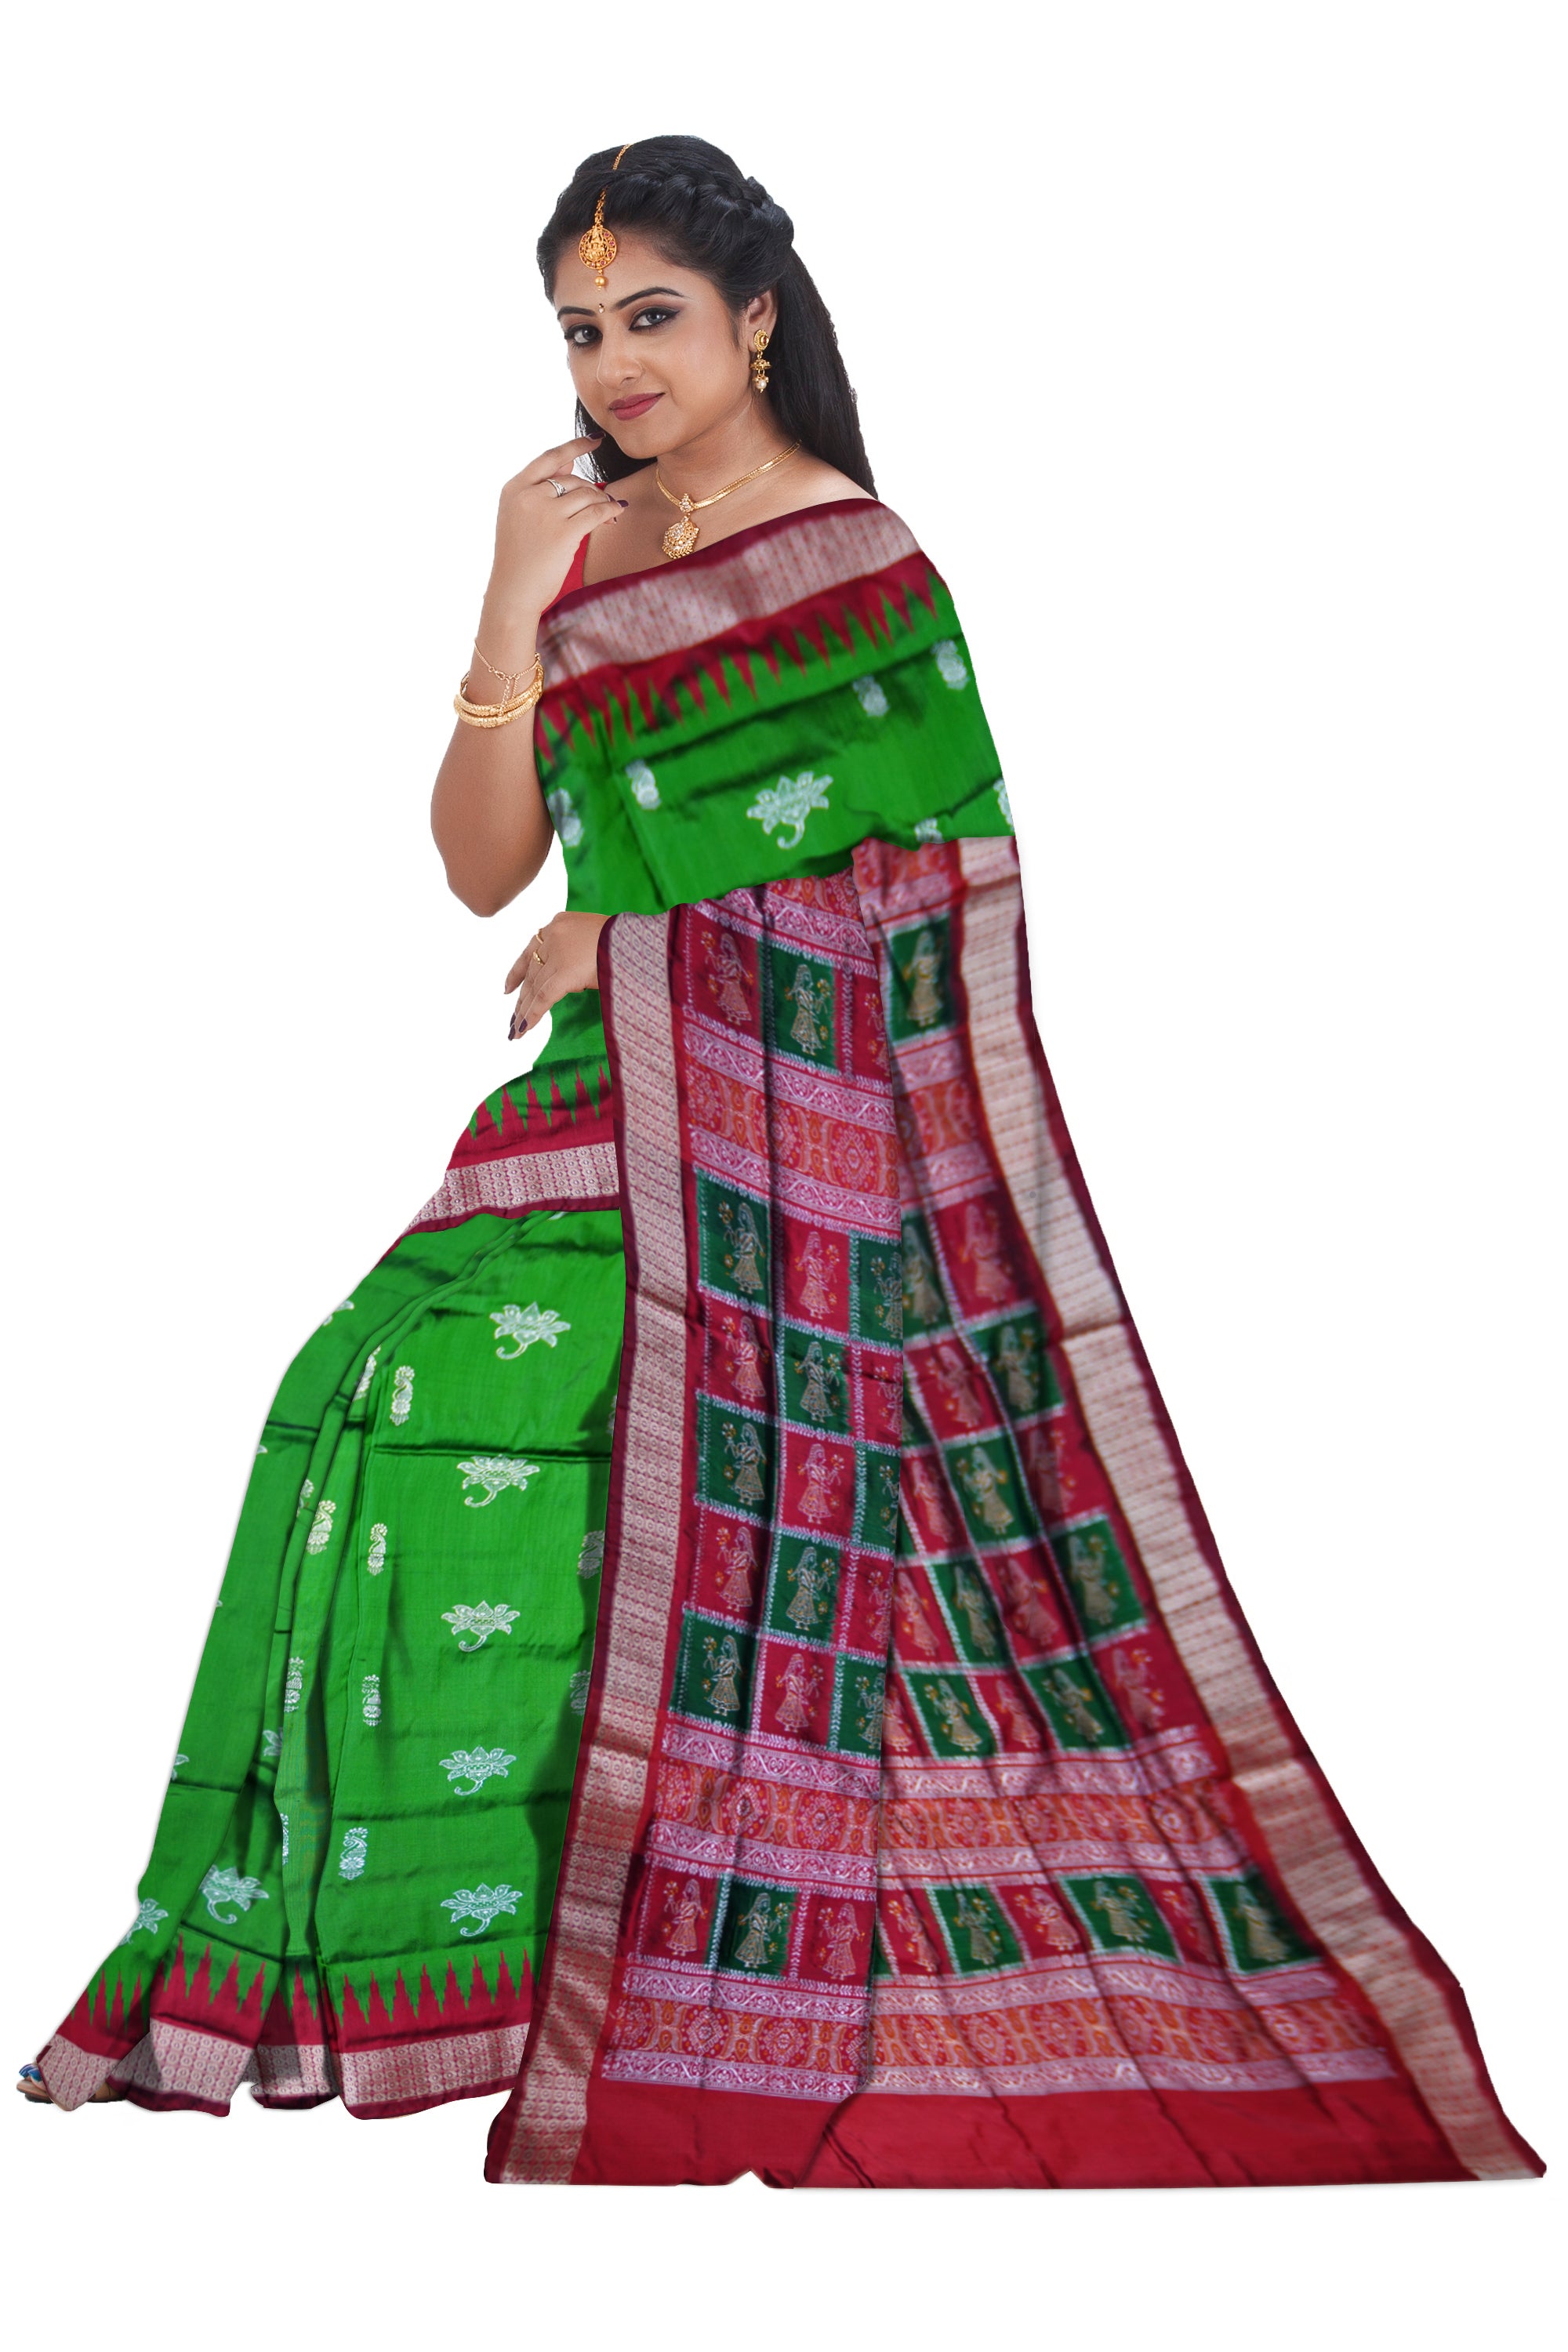 BEAUTIFUL LOTUS PATTERN PATA SAREE IS GREEN AND MAROON COLOR BASE,ATTACHED WITH MATCHING BLOUSE PIECE. - Koshali Arts & Crafts Enterprise